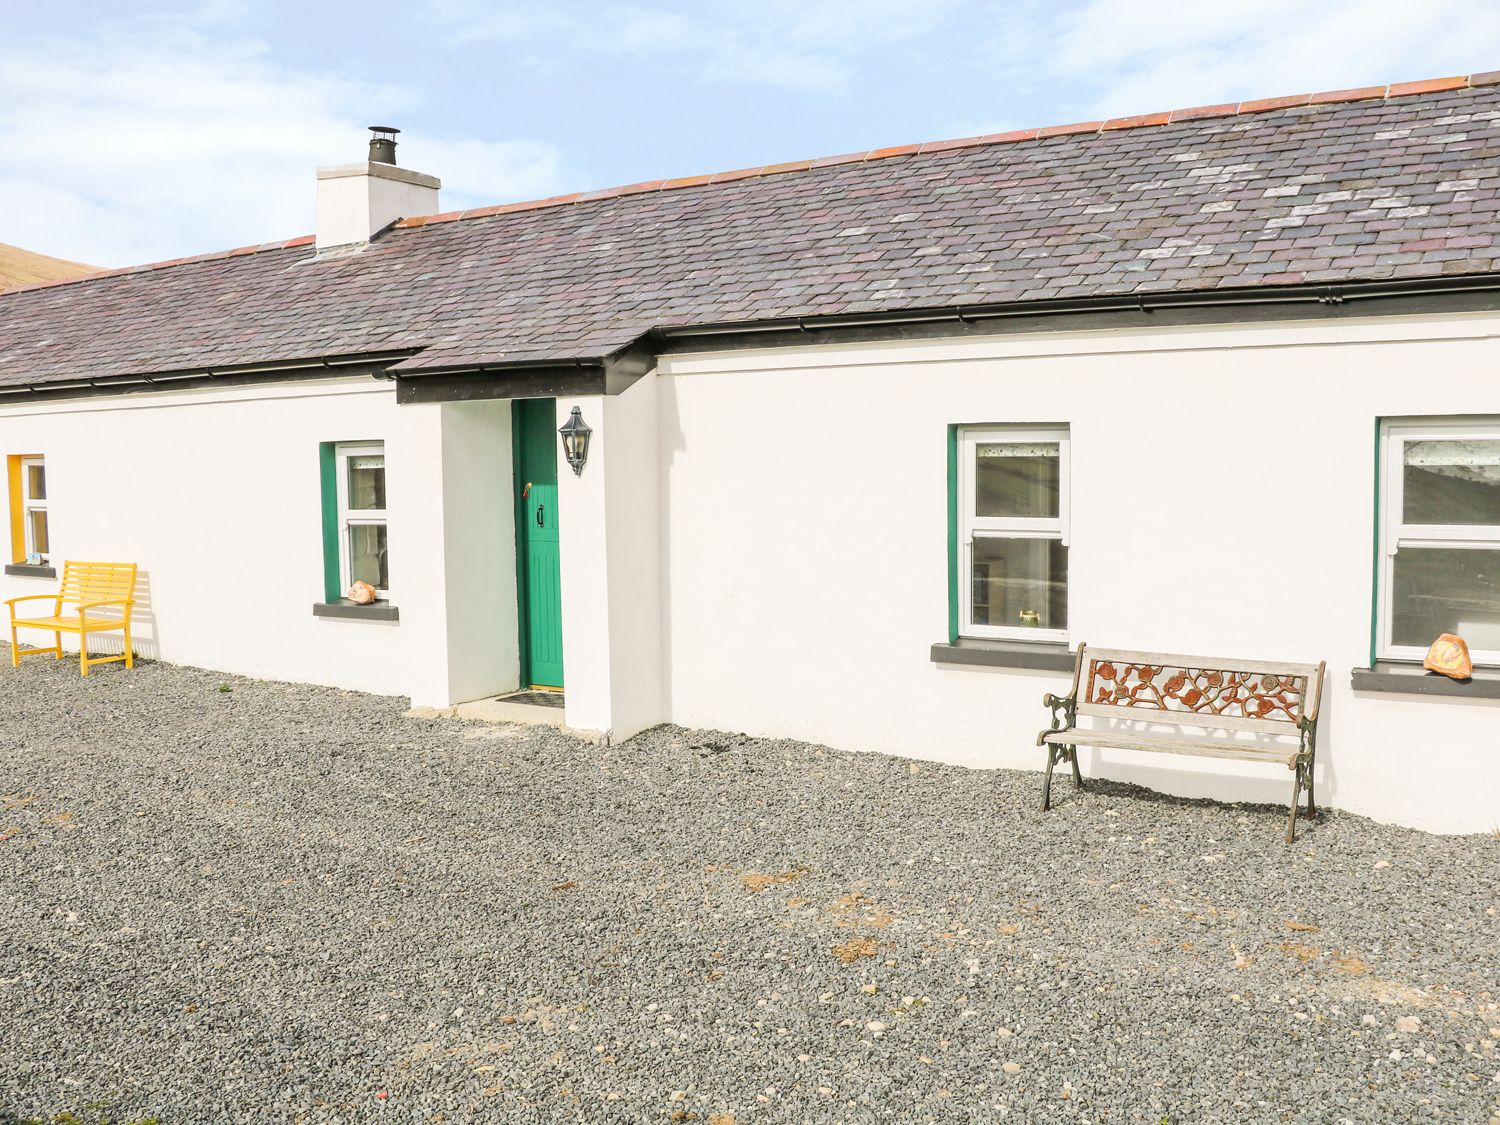 Pat White's Cottage, County Down